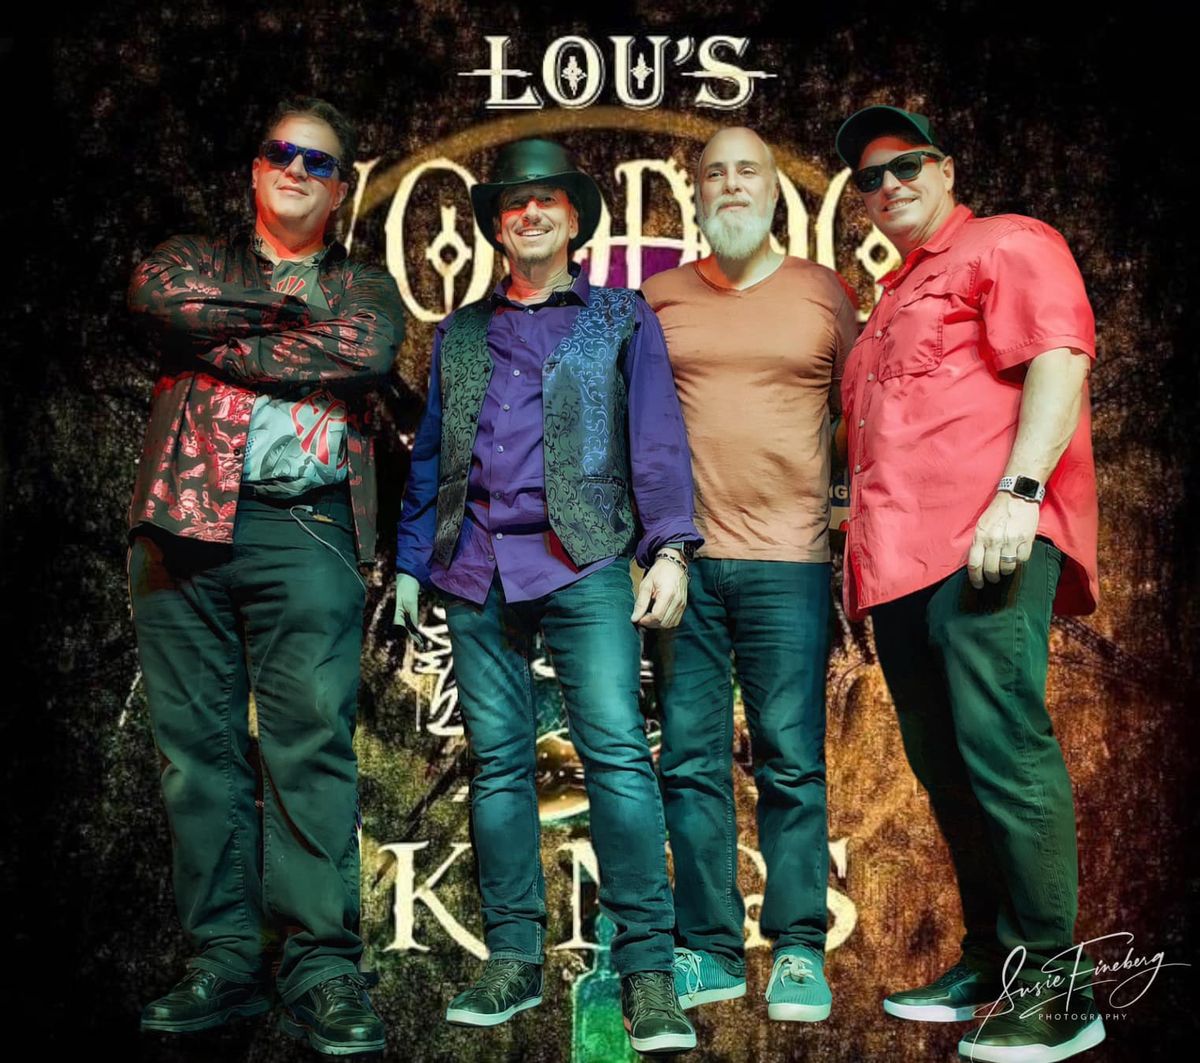 Lou's Voodoo Kings takes the stage at Sandbar Sports Grill in Cutler Bay